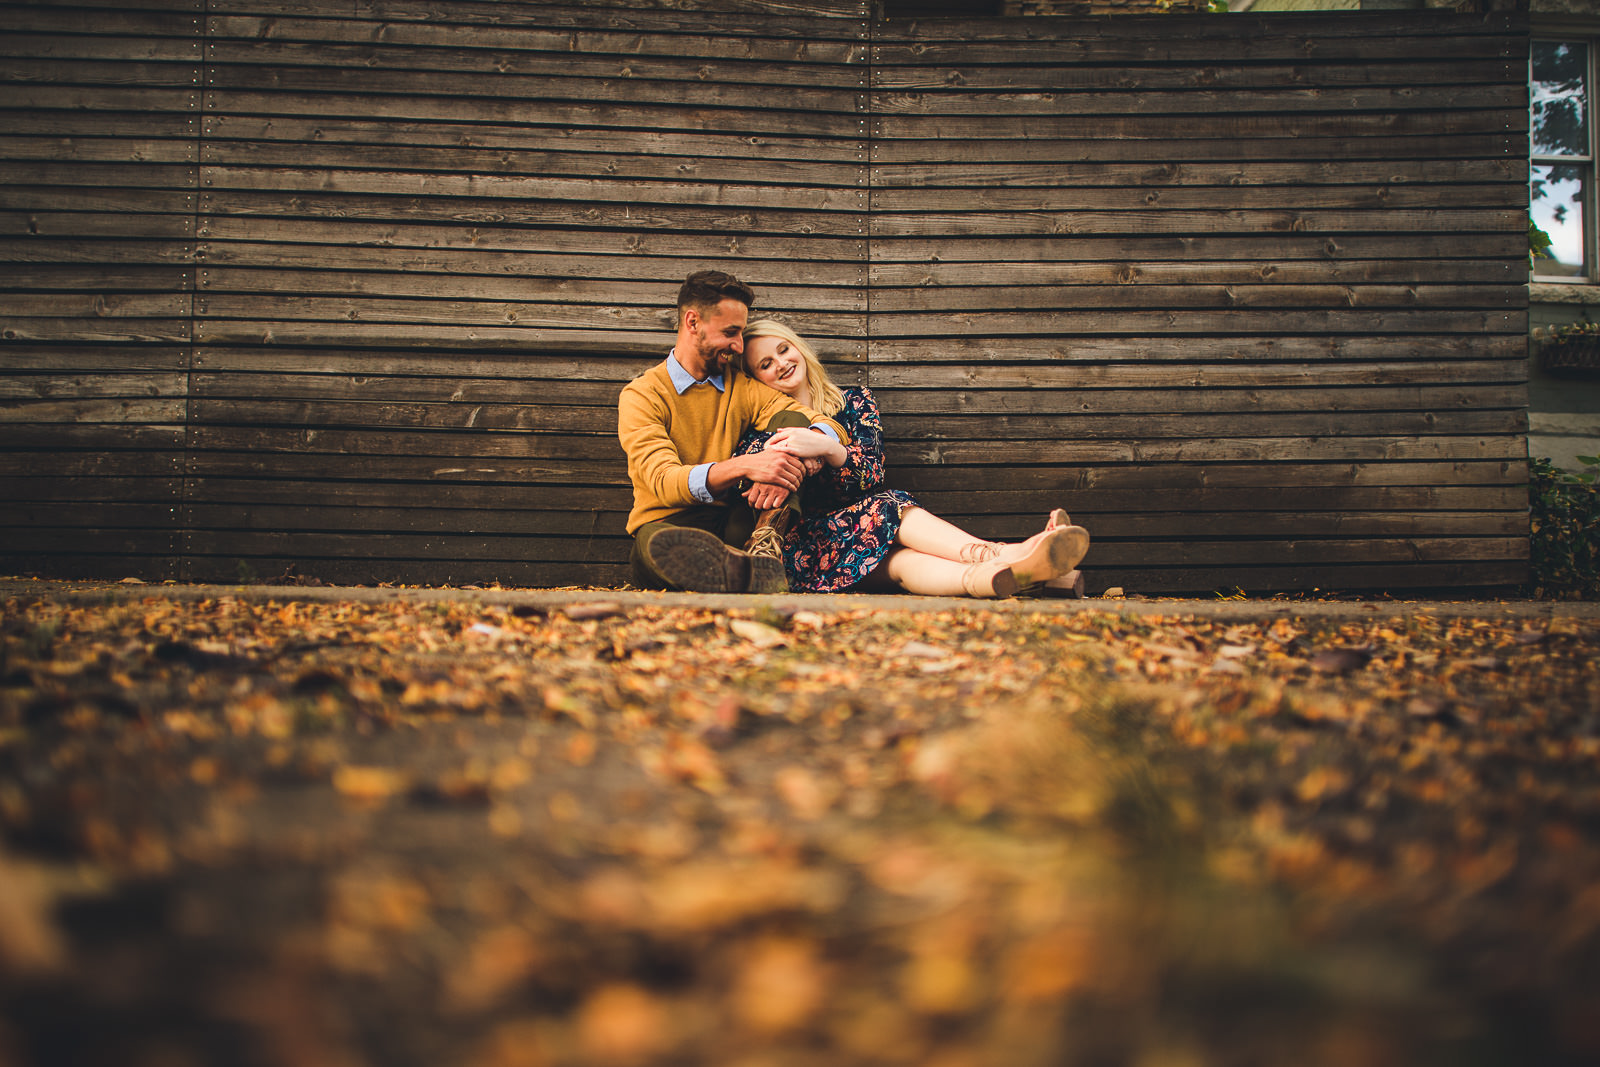 08 wicker park wes anderson photos - Wes Anderson Inspired Engagement Session in Wicker Park // Kelsey + Mark